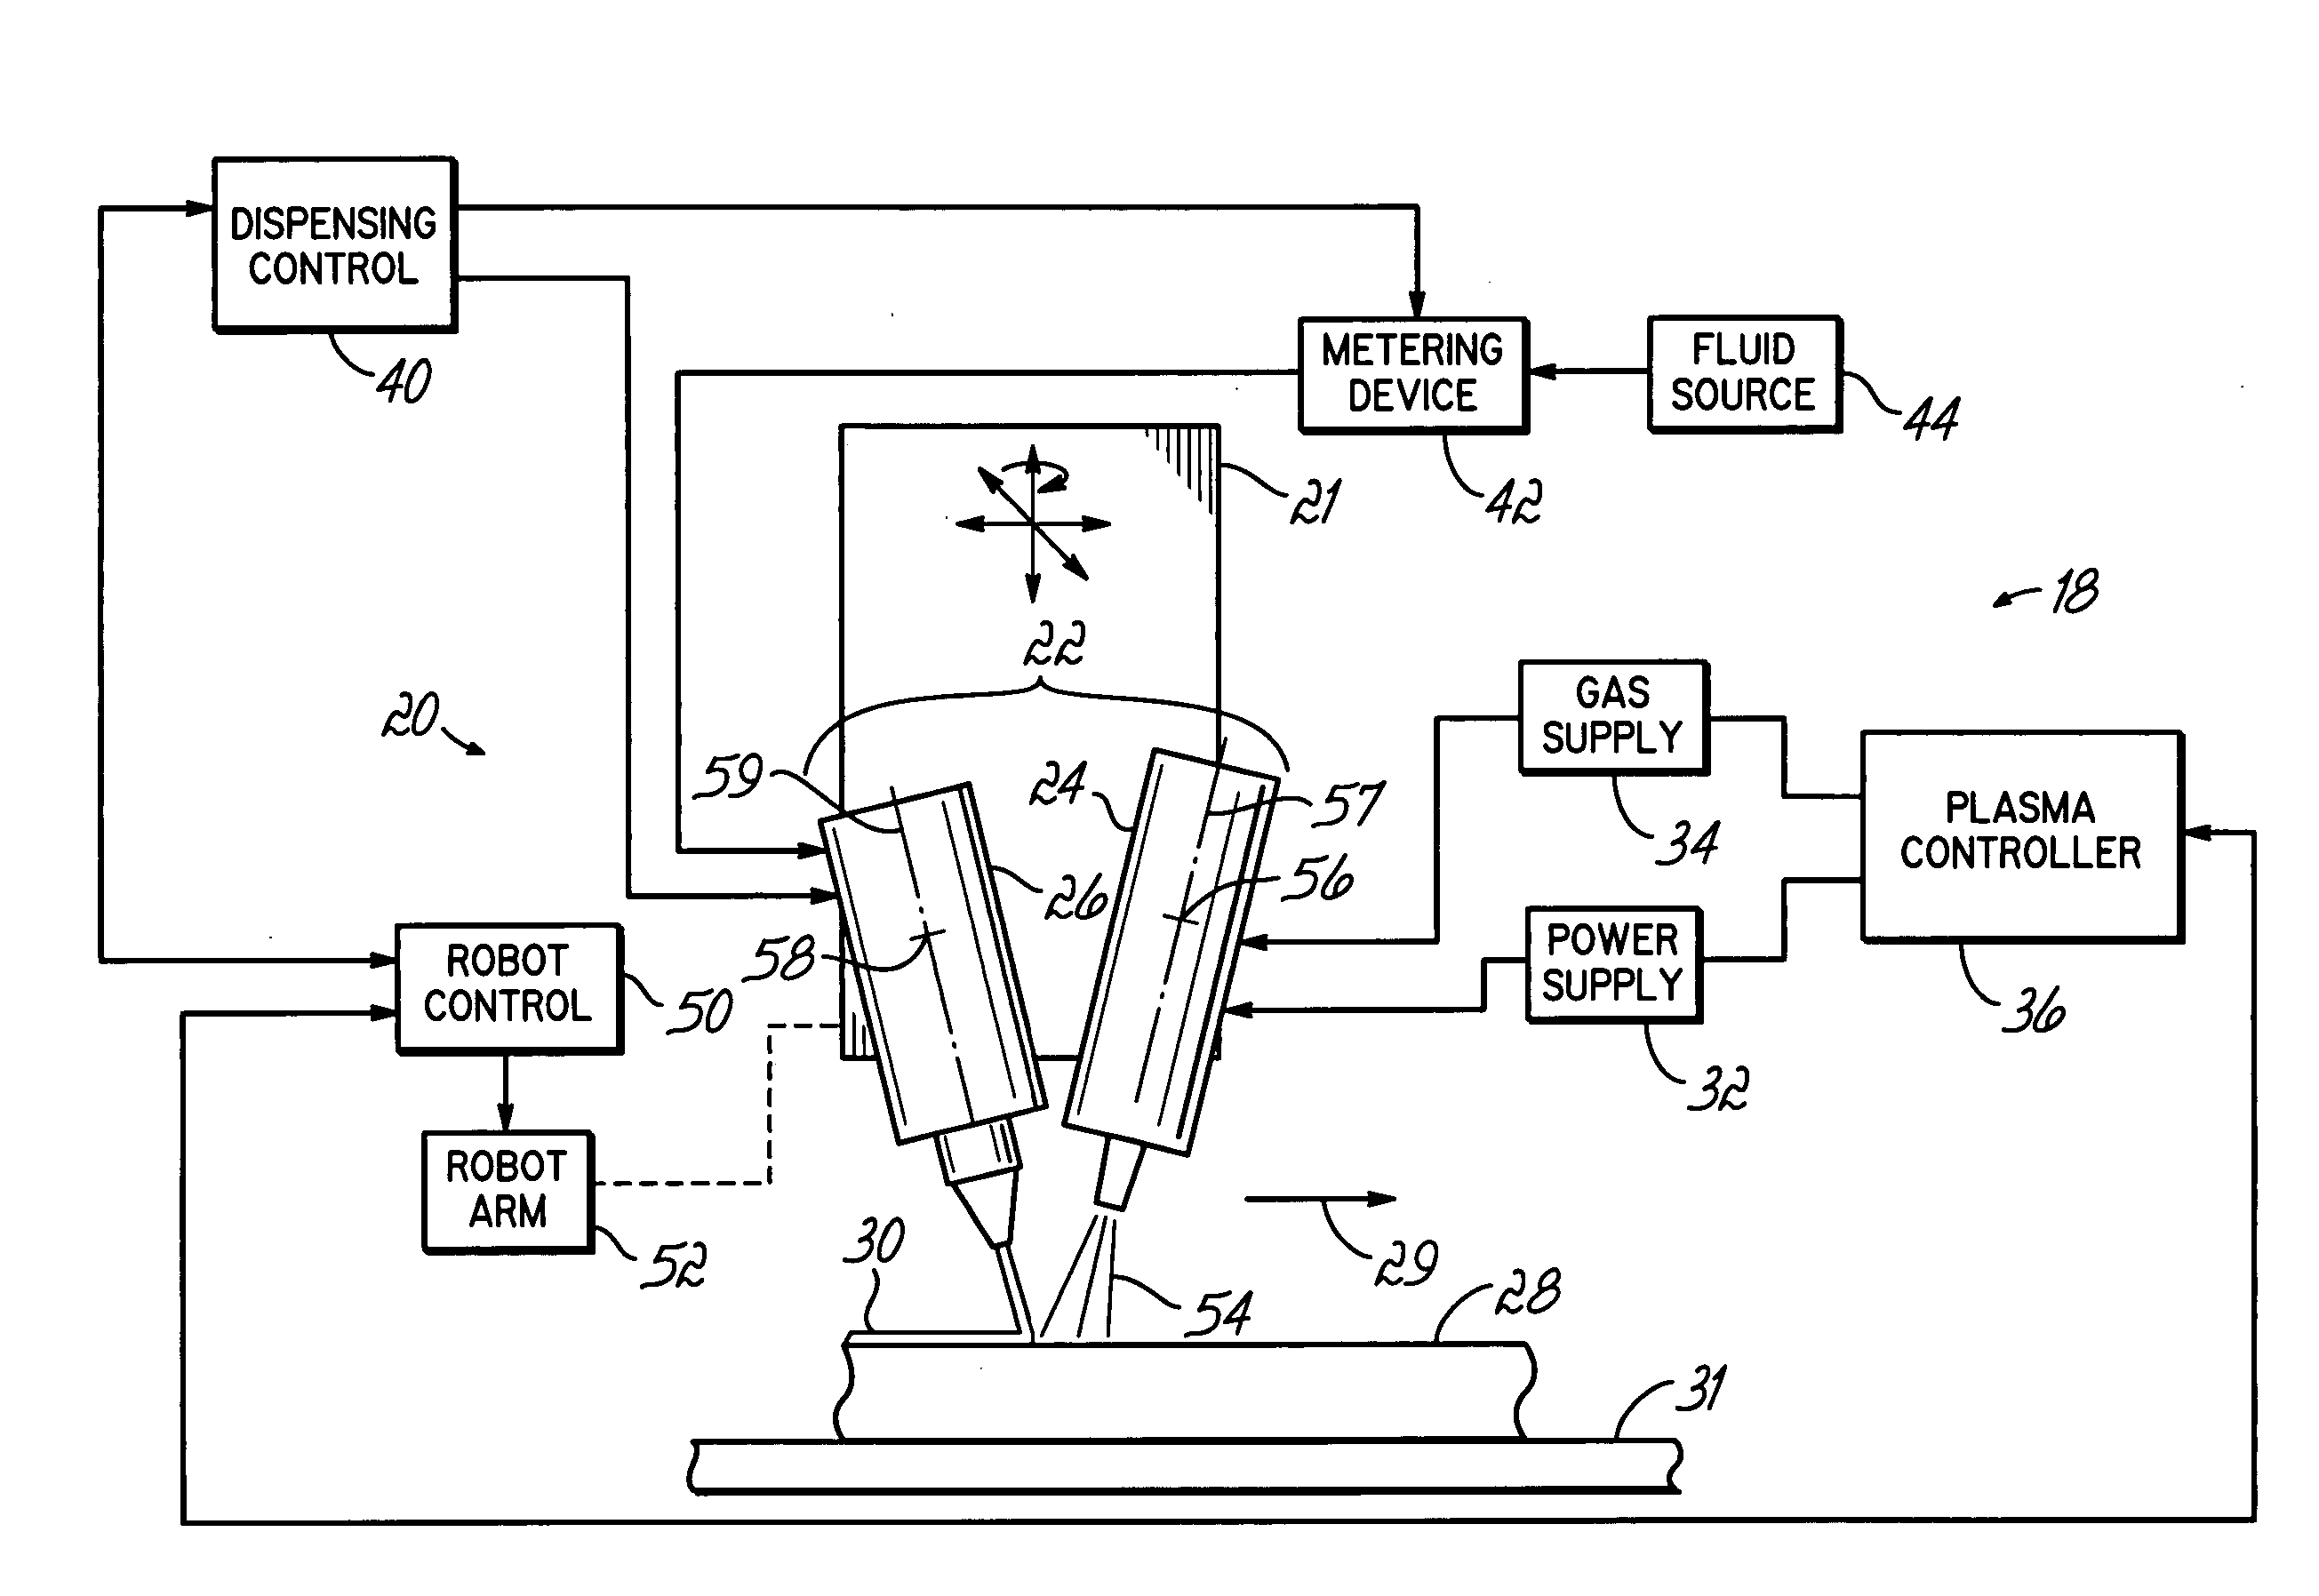 Apparatus and method for plasma treating and dispensing an adhesive/sealant onto a part